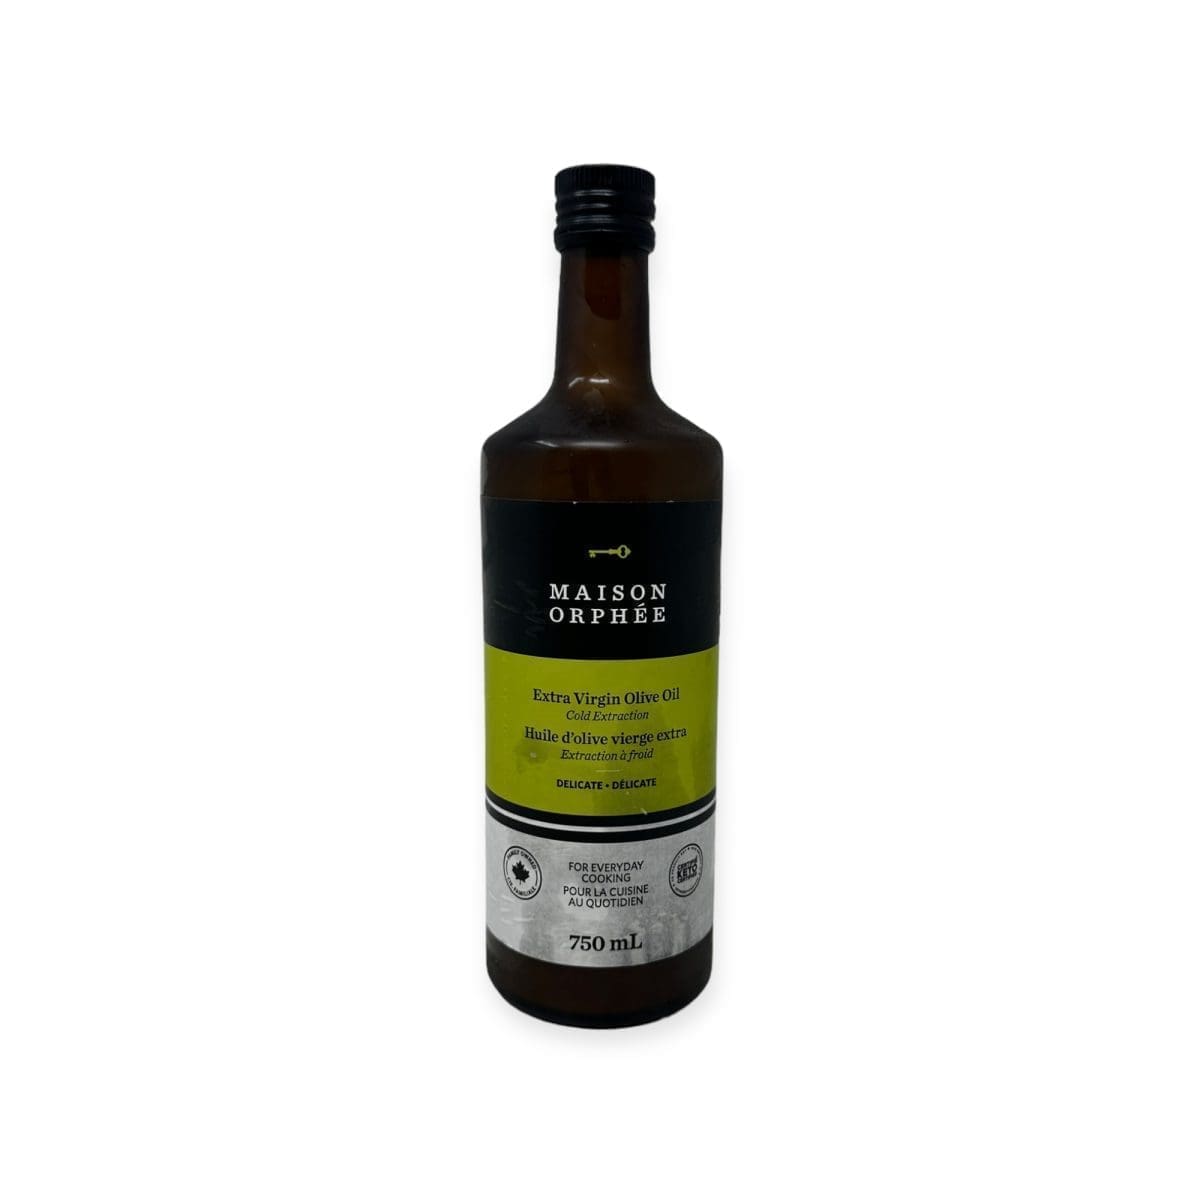 Maison Orphee Extra Virgin Olive Oil Cold Extraction (750ml)